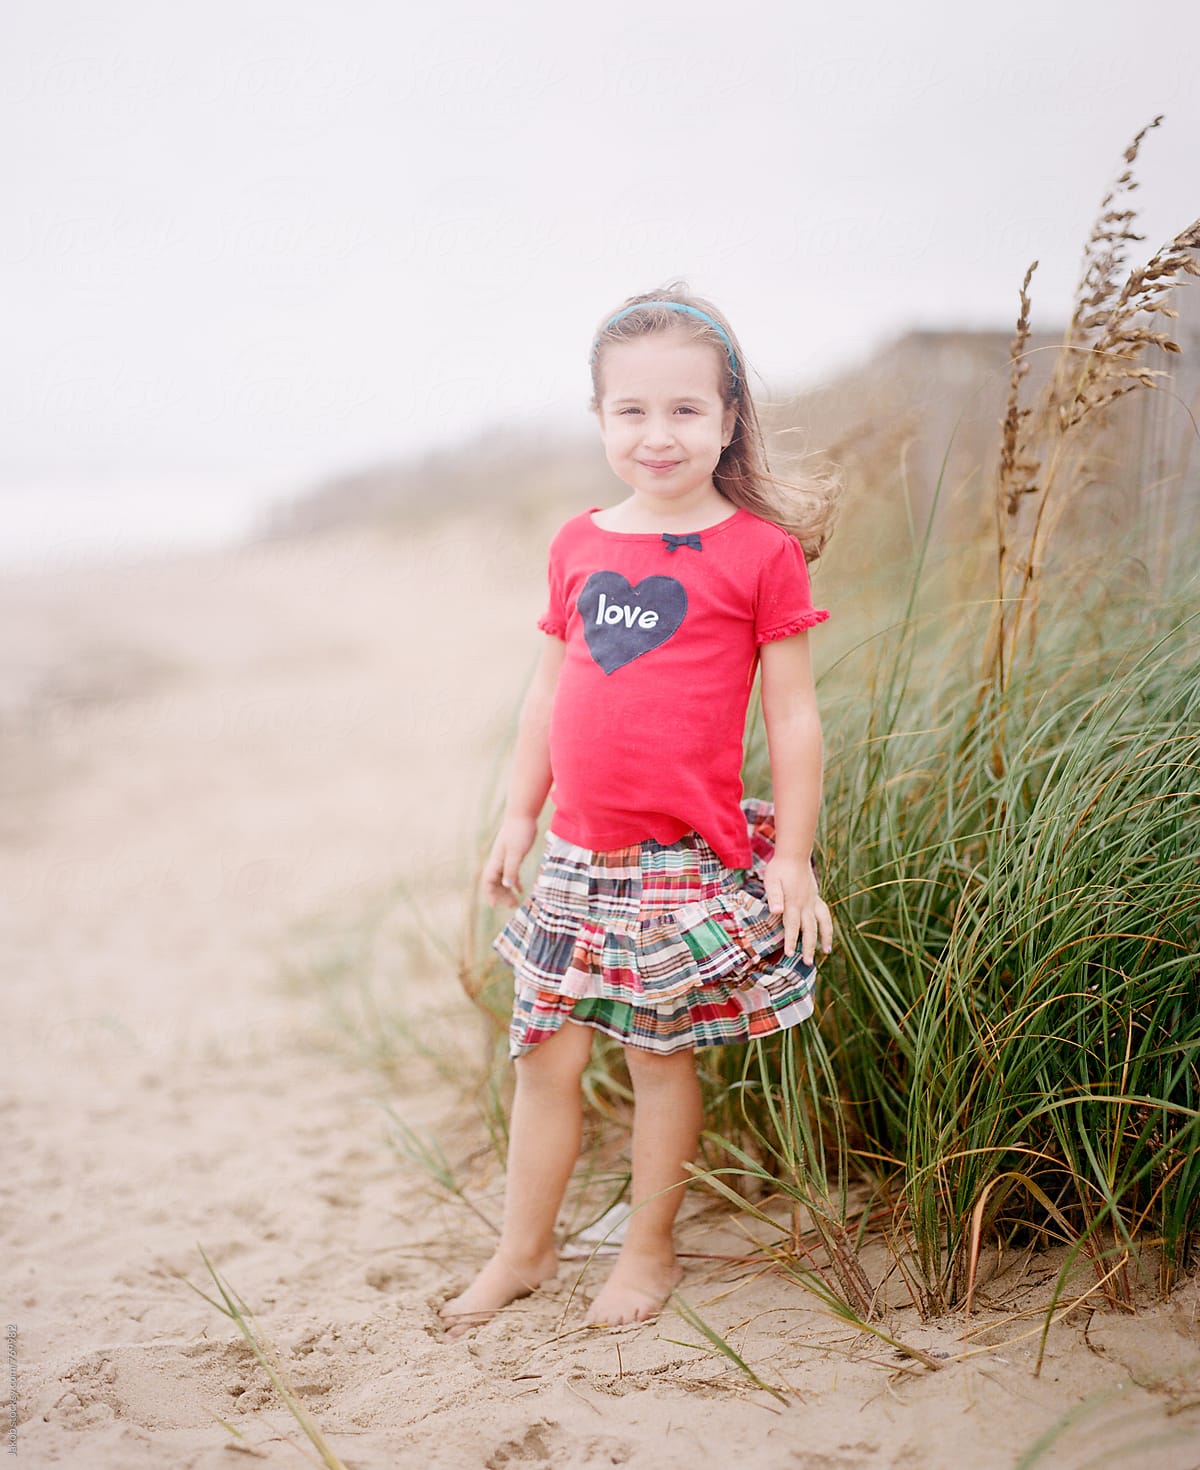 Portrait Of Cute Young Girl On A Holiday by Stocksy Contributor